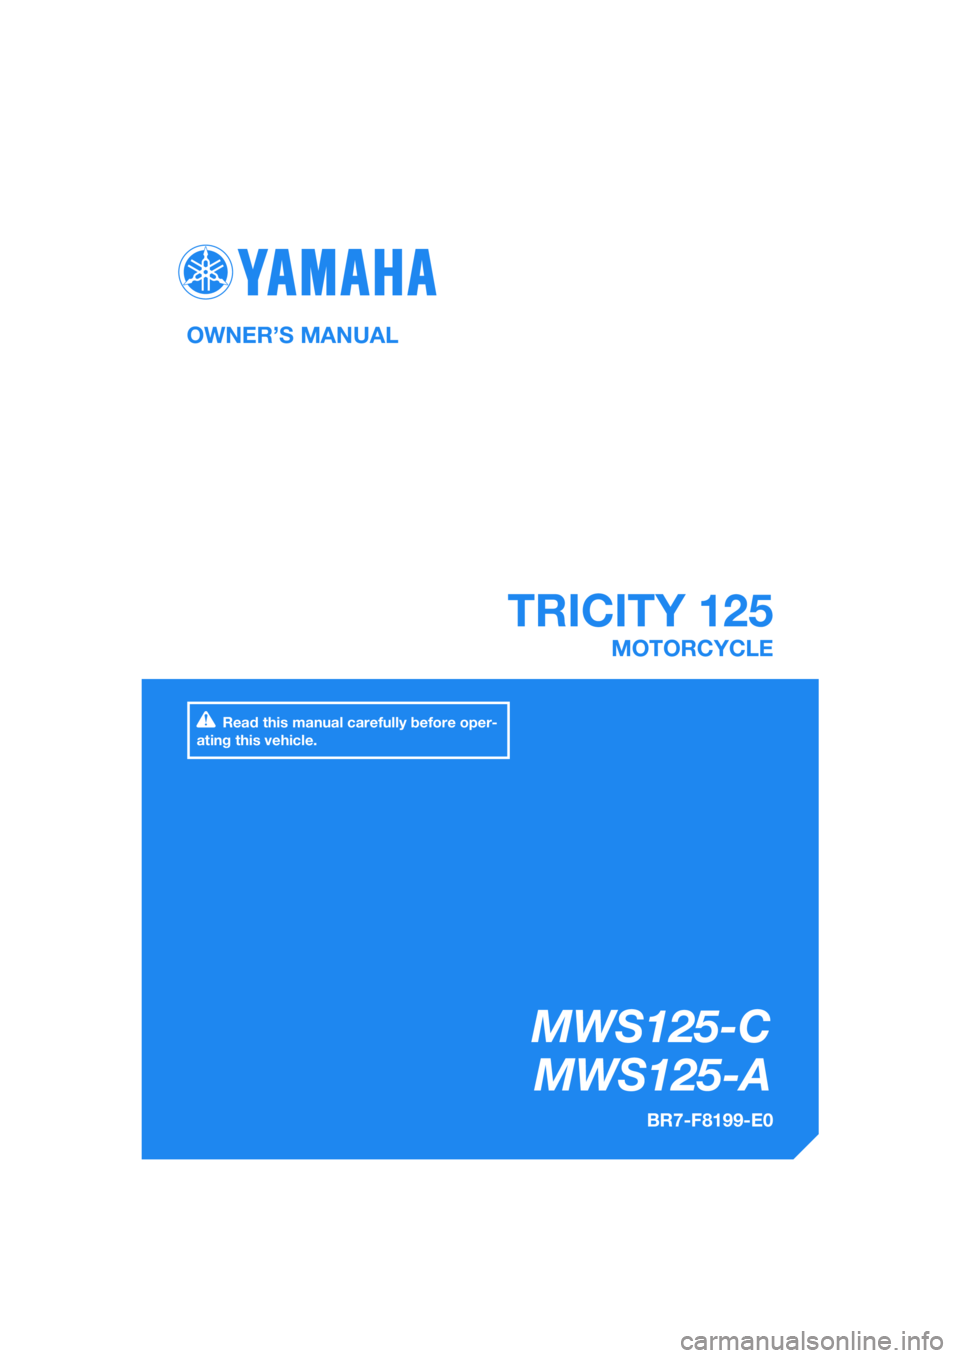 YAMAHA TRICITY 2017  Owners Manual DIC183
MWS125-CMWS125-A
TRICITY 125
OWNER’S MANUAL
BR7-F8199-E0
MOTORCYCLE
[English  (E)]
Read this manual carefully before oper-
ating this vehicle. 